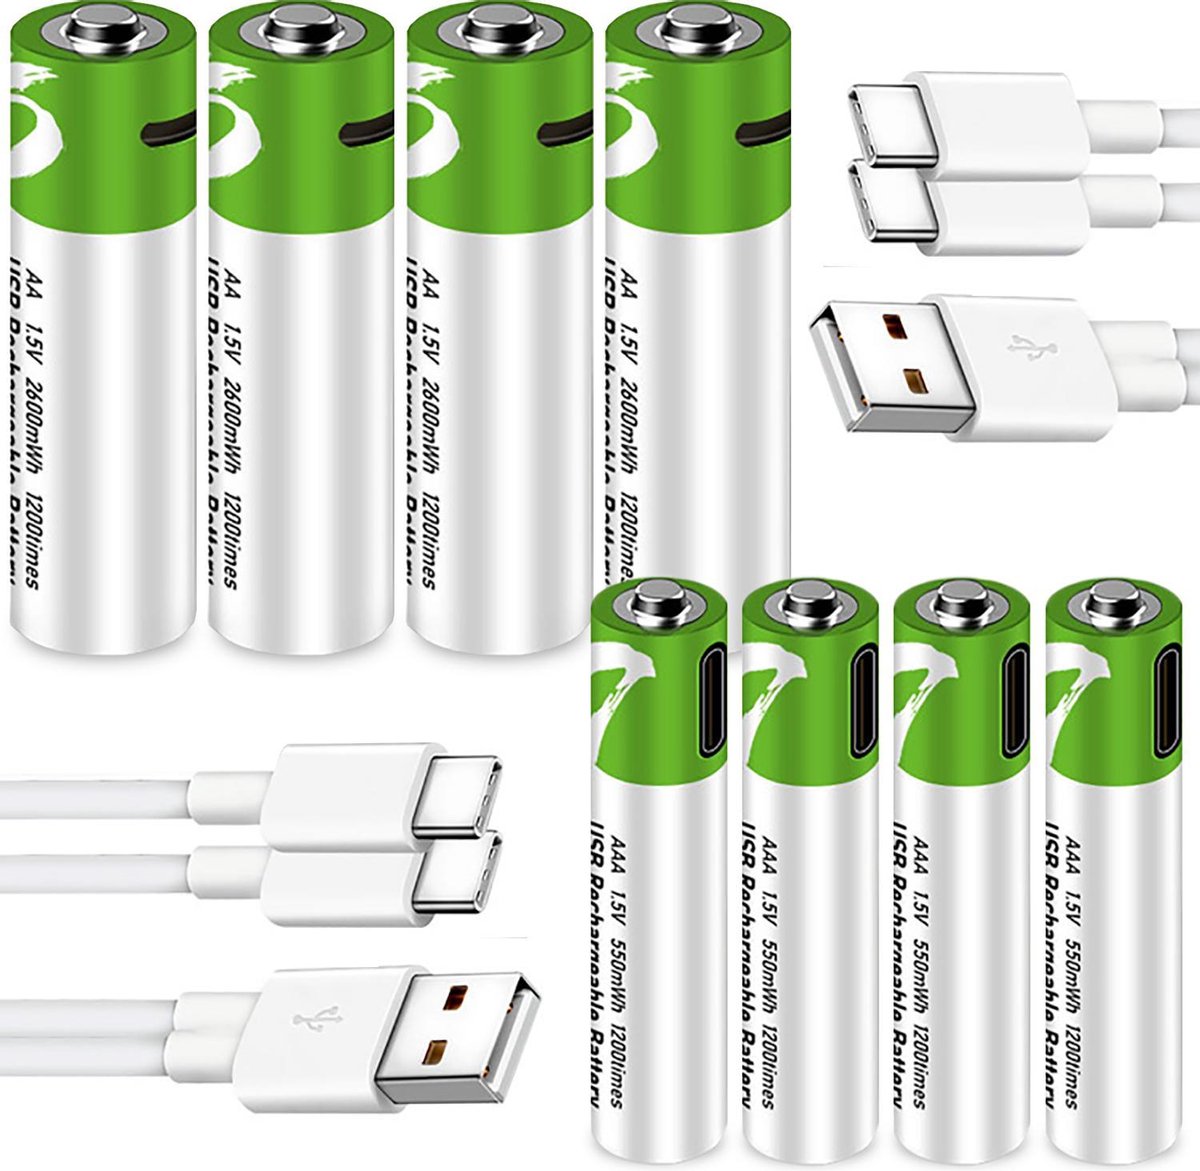 100% PeakPower - Chargeur 8 Piles Rechargeables AA et AAA avec 4